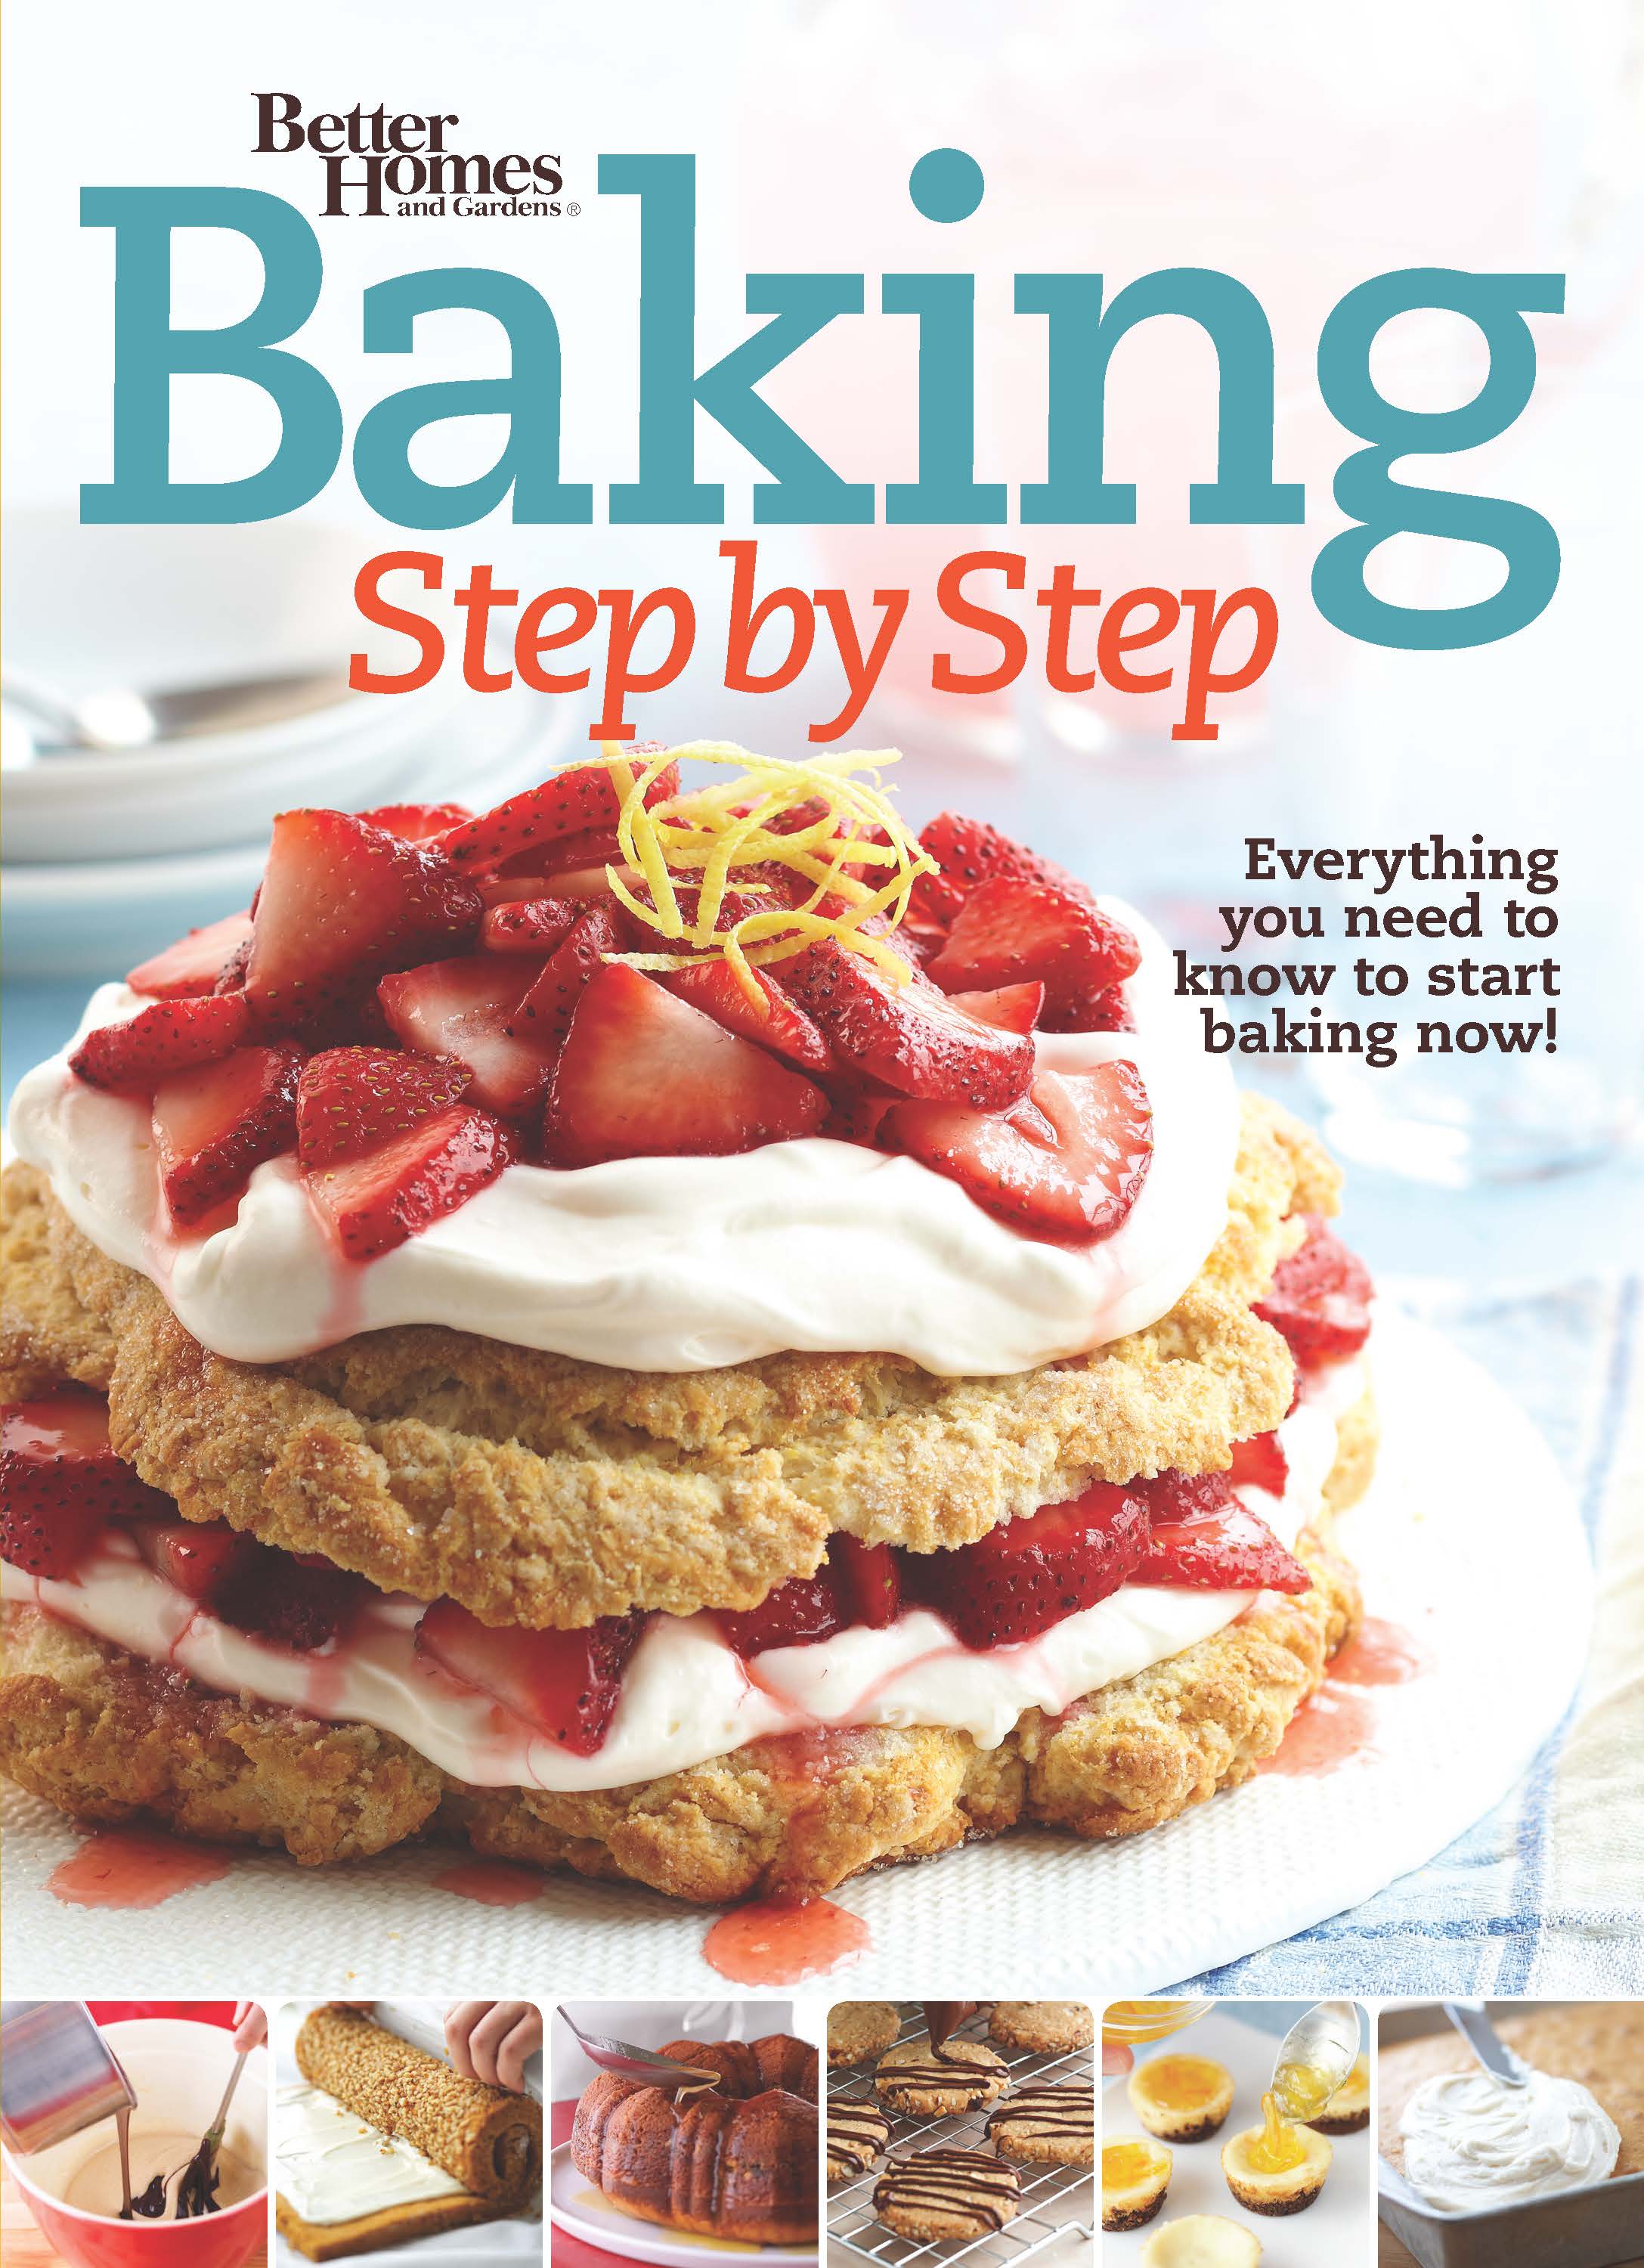 Umschlagbild für Better Homes and Gardens Baking Step by Step [electronic resource] : Everything You Need to Know to Start Baking Now!